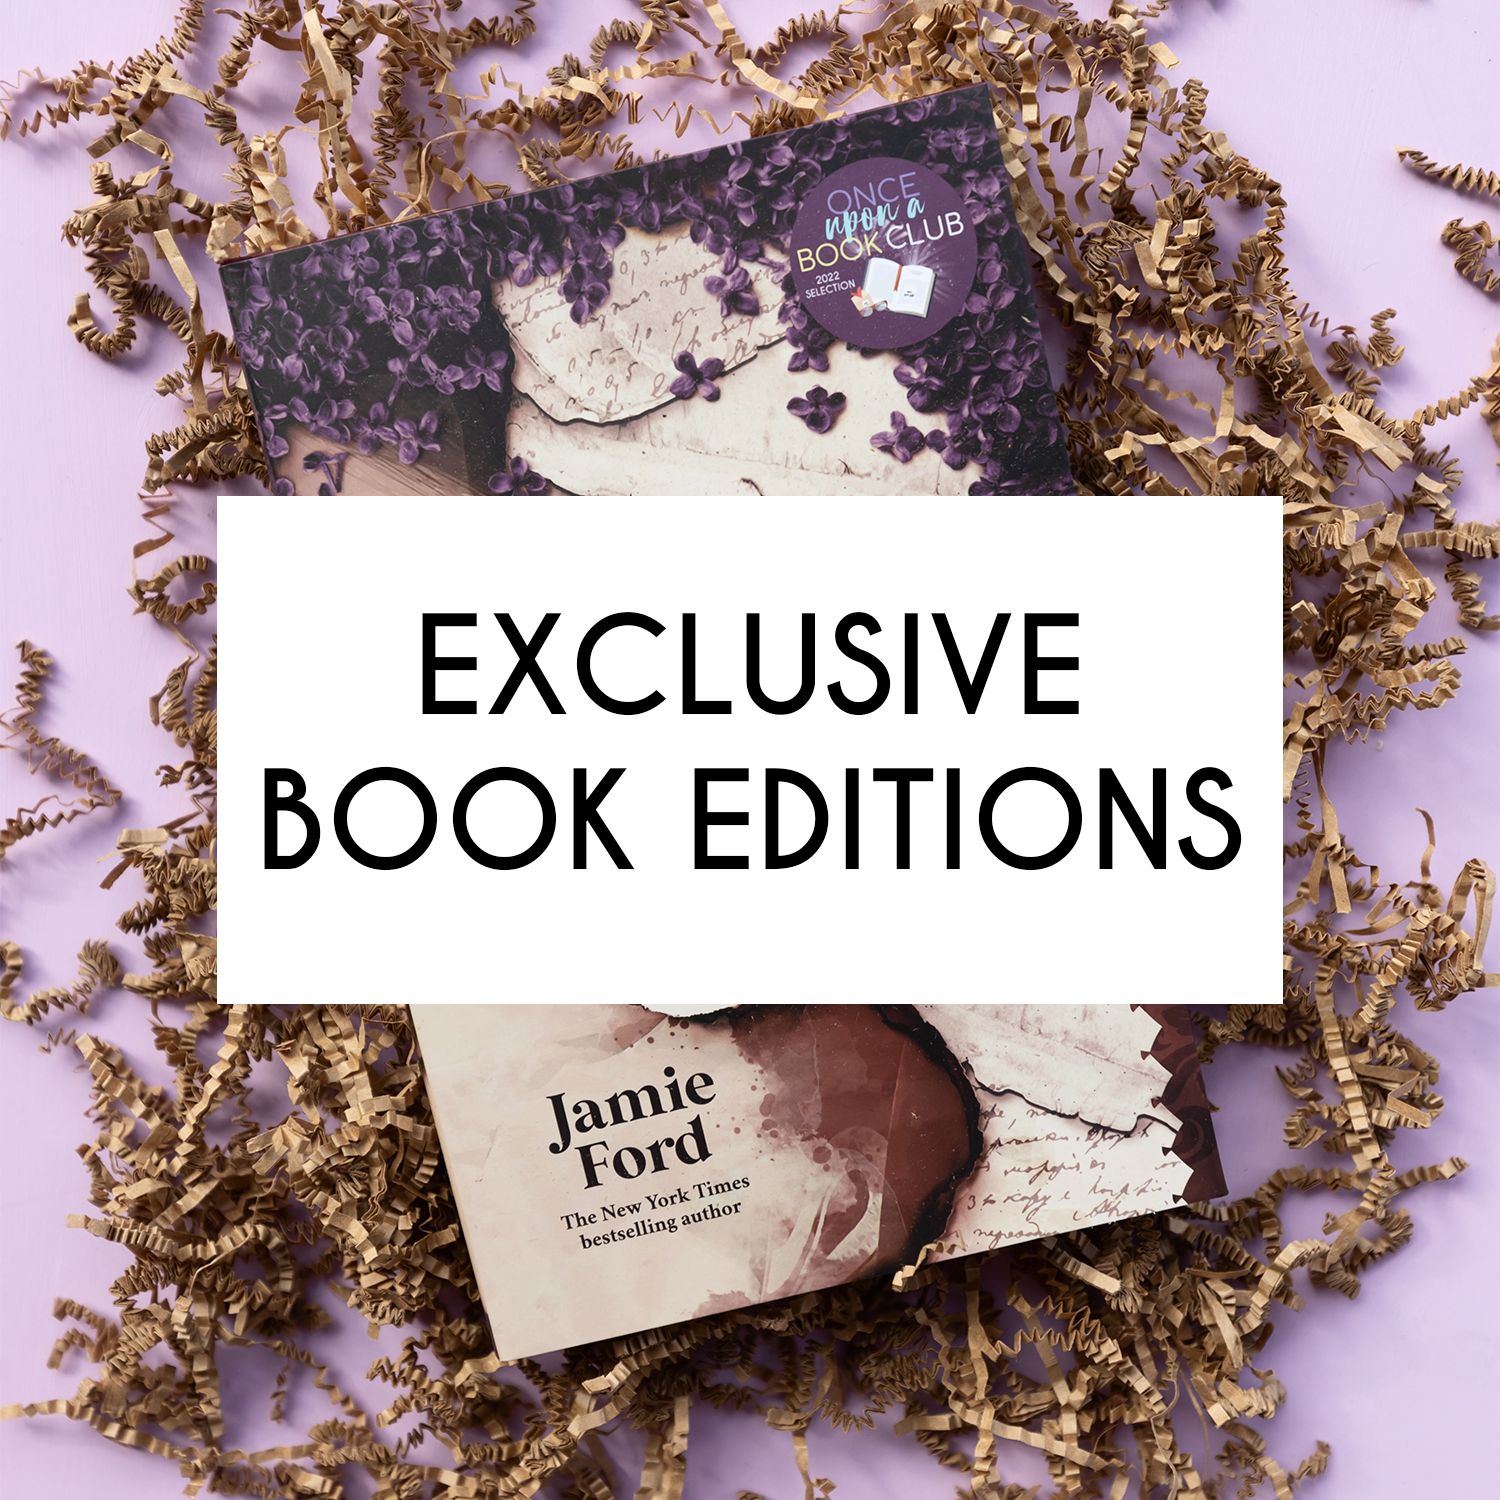 "Exclusive Book Editions" is centered over a light purple background with a hardcover book and brown crinkle paper